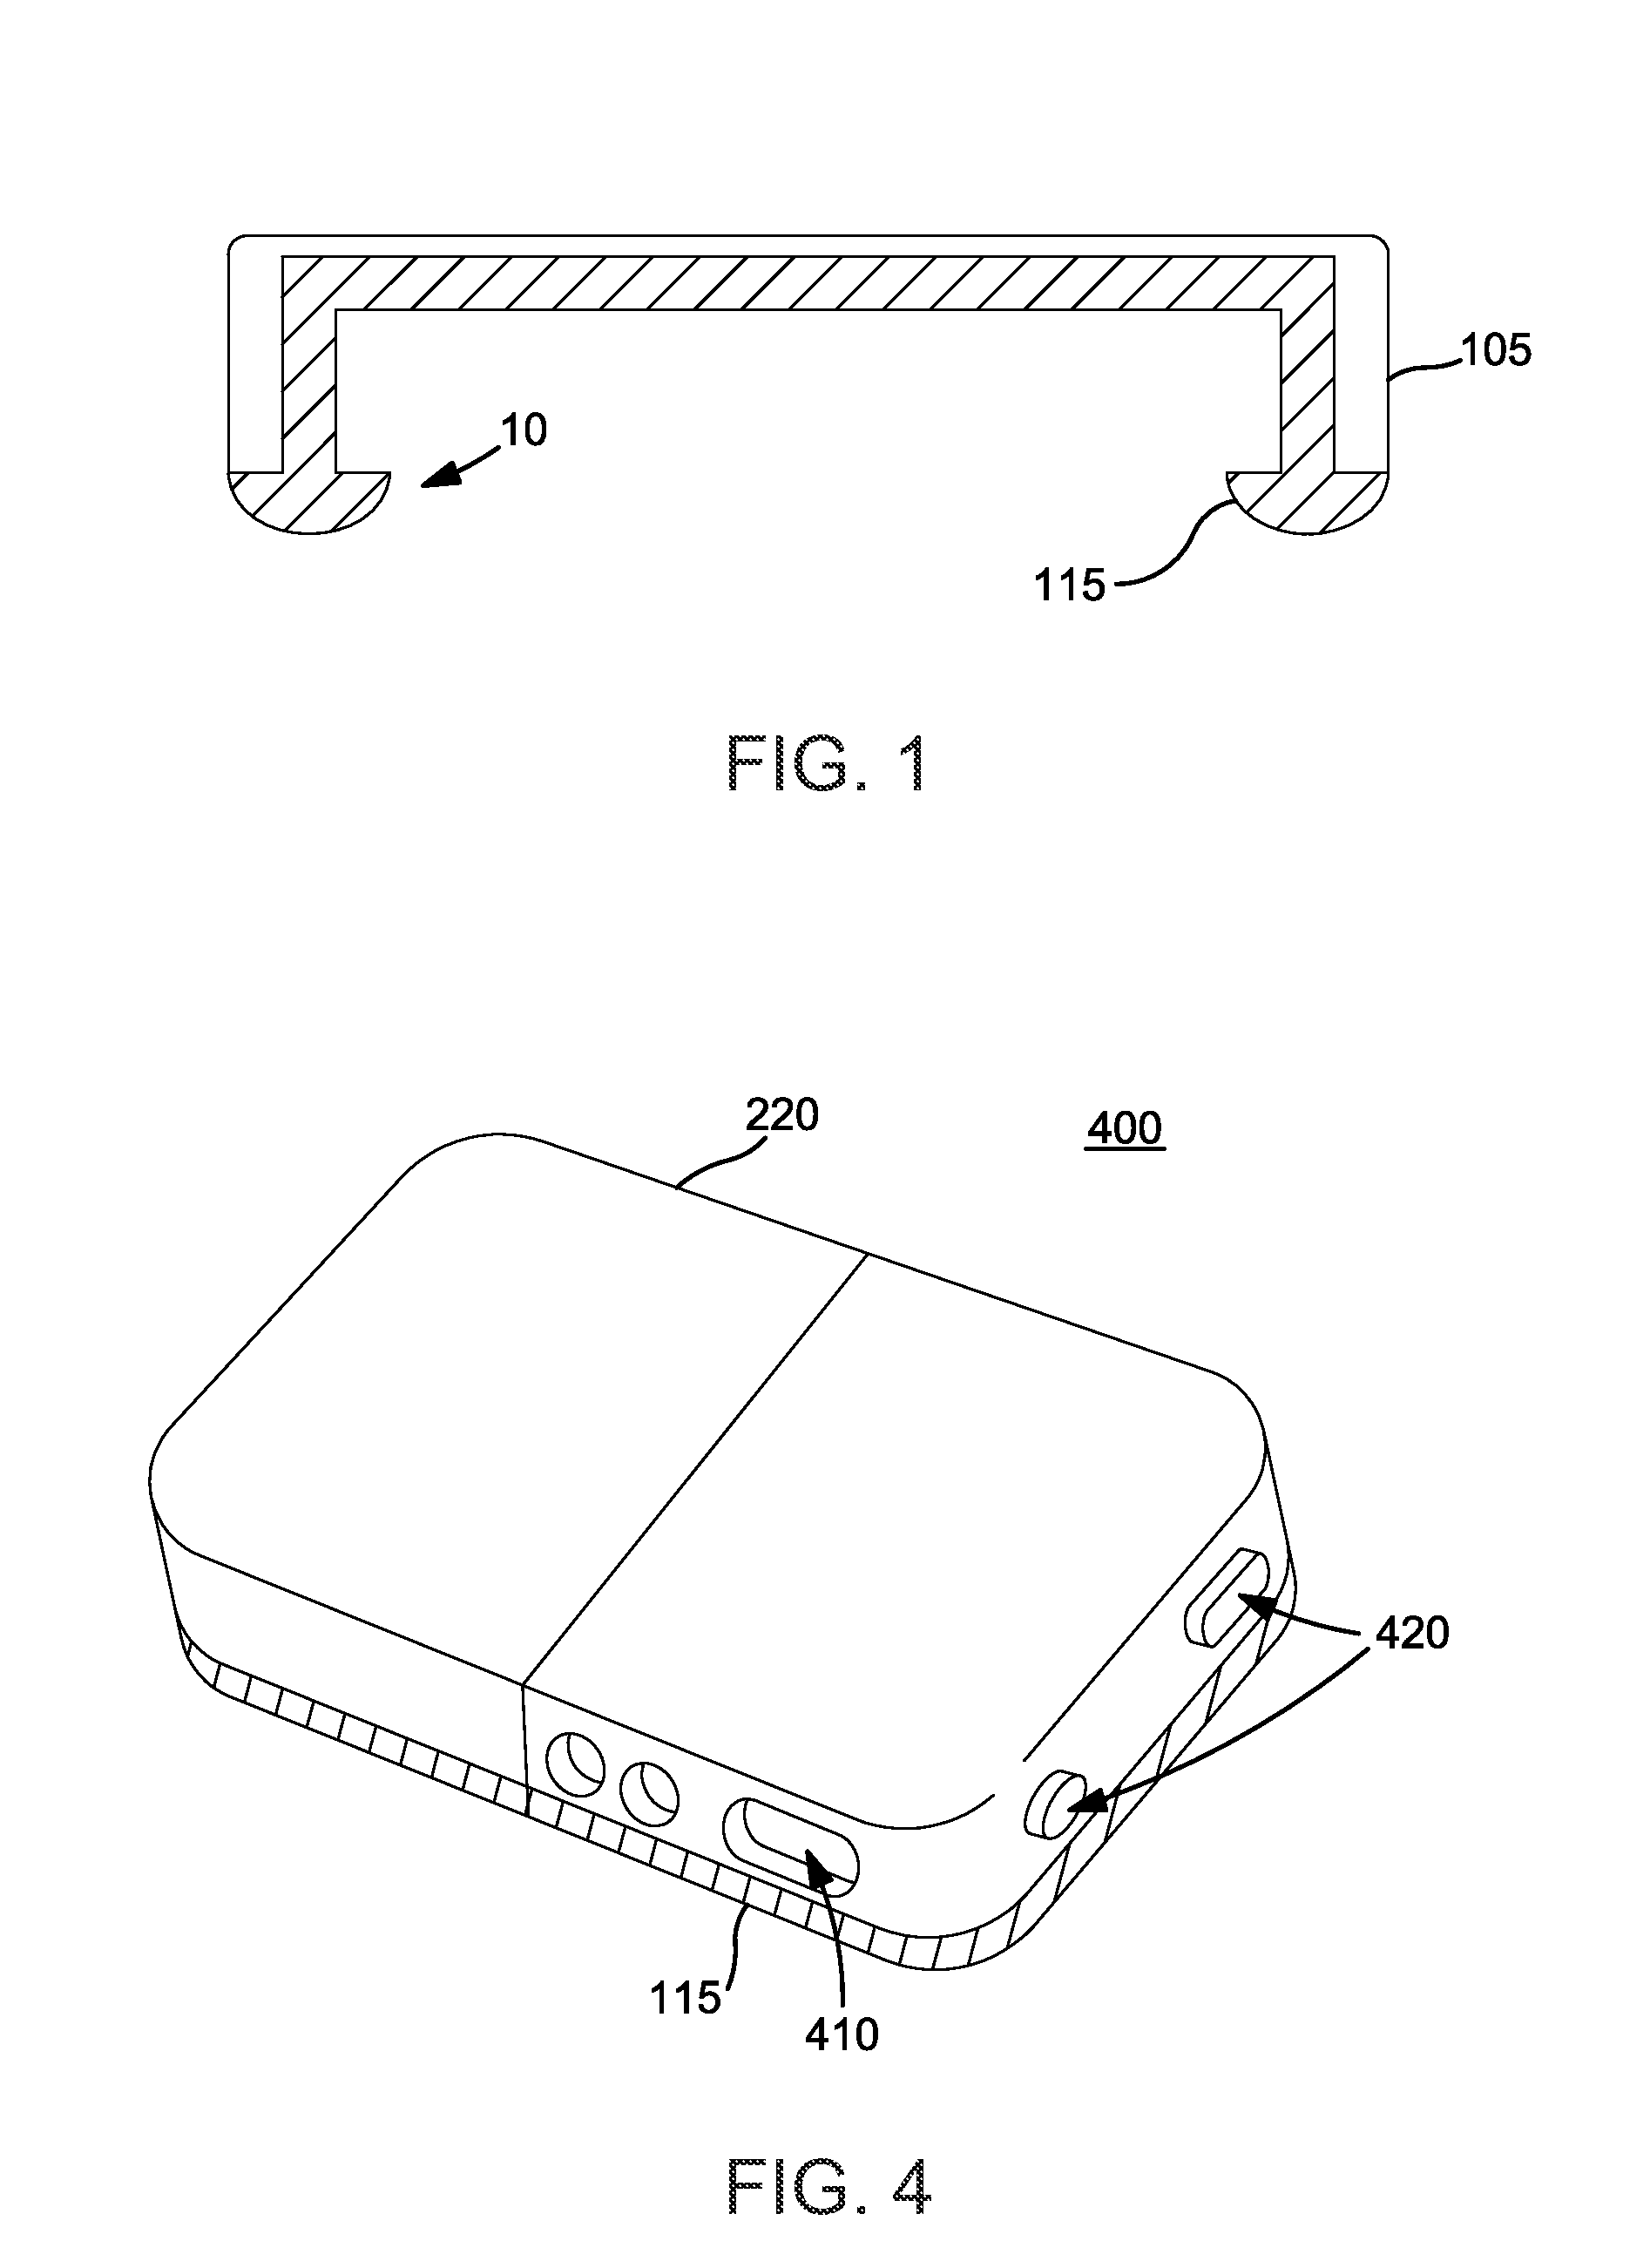 Case for a portable electronic device with over-molded thermo-formed film